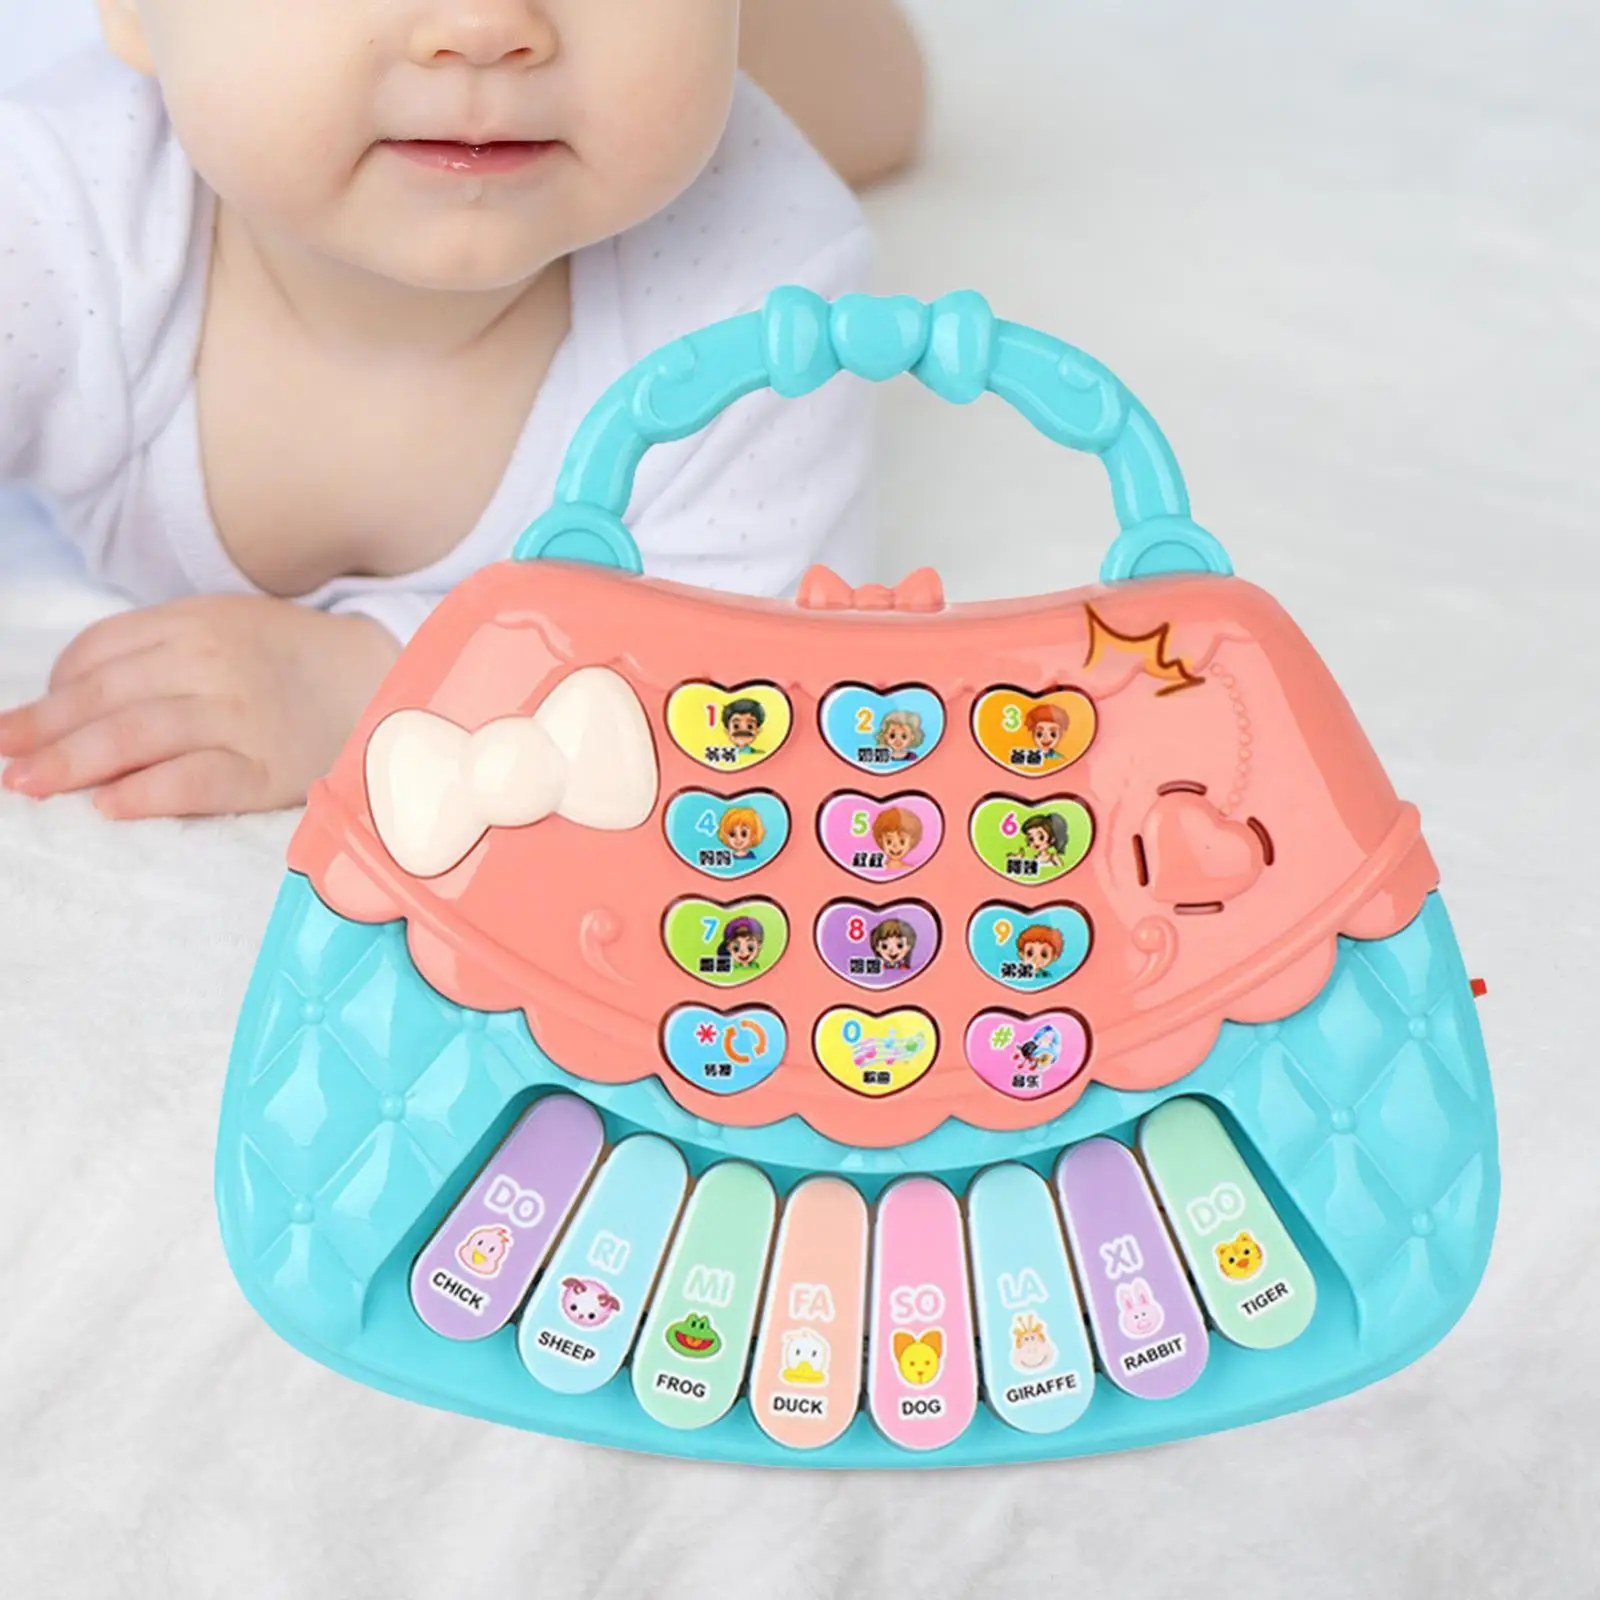 Mini Electronic Piano Toy Development Toys with Sound and Lights for Infants